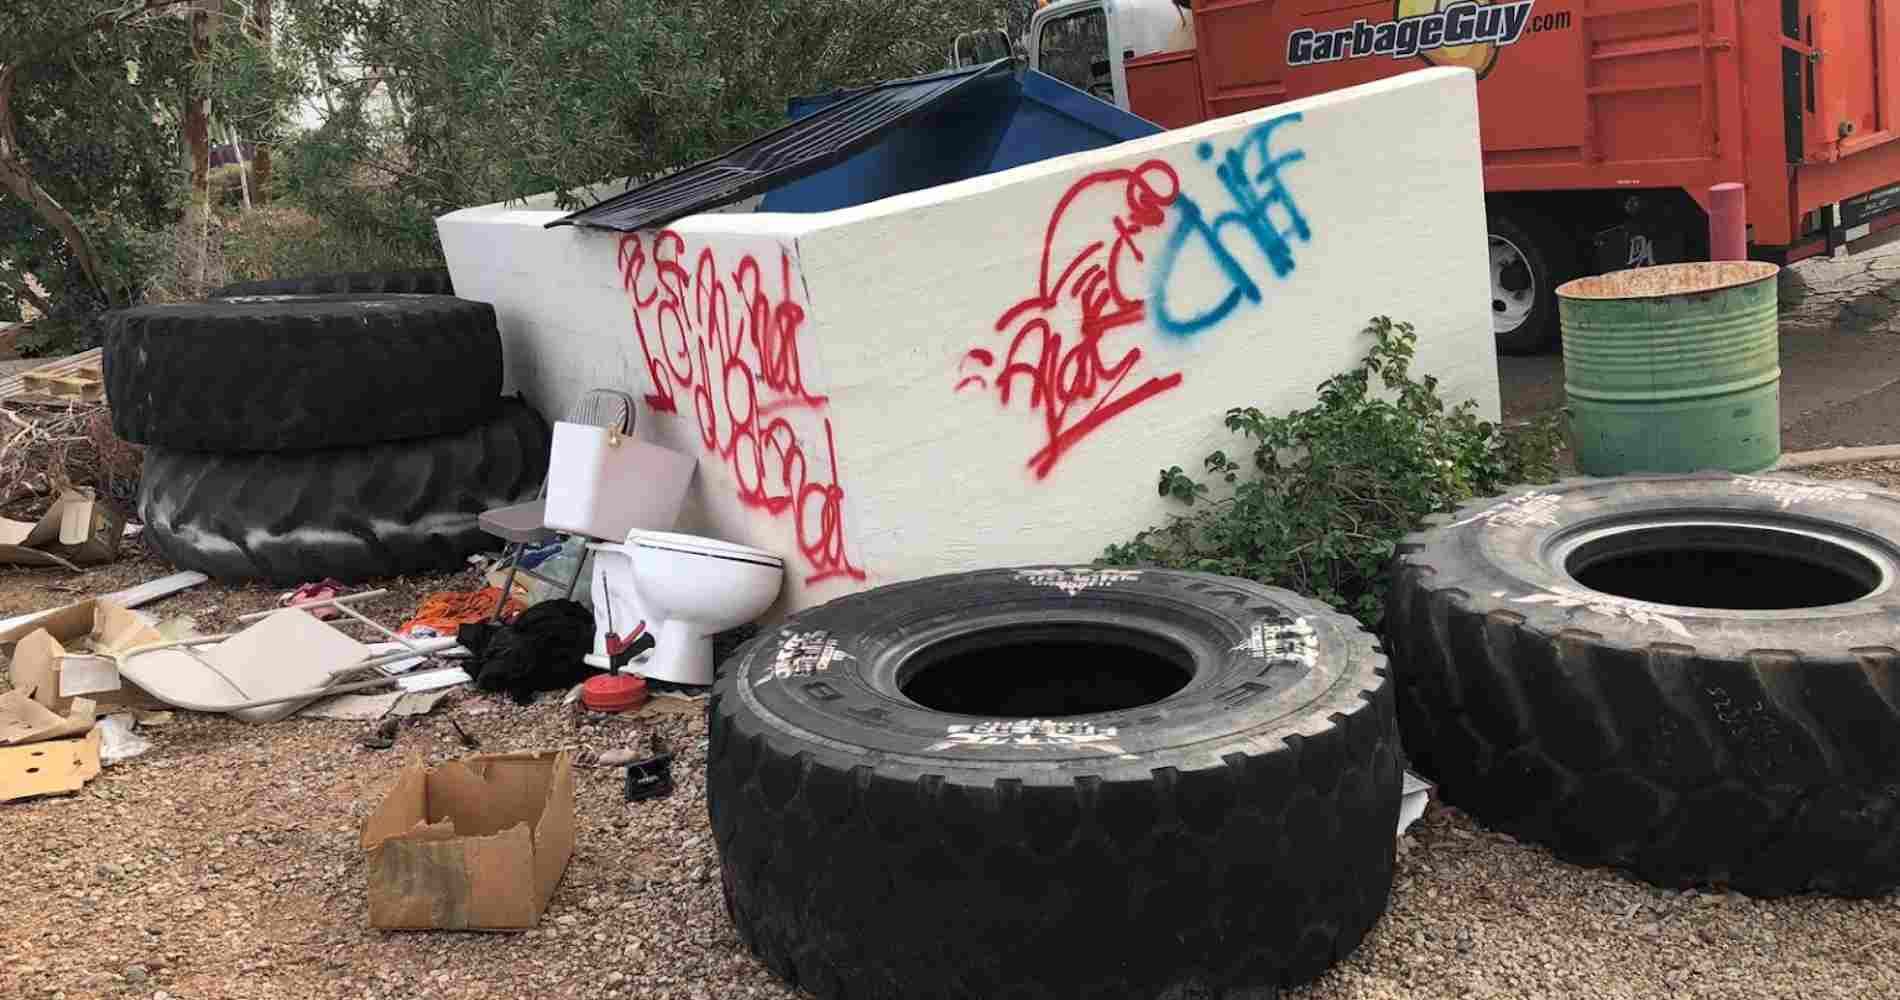 #1 for Tire Disposal in Arcadia, AZ with Over 1200 5-Star Reviews!